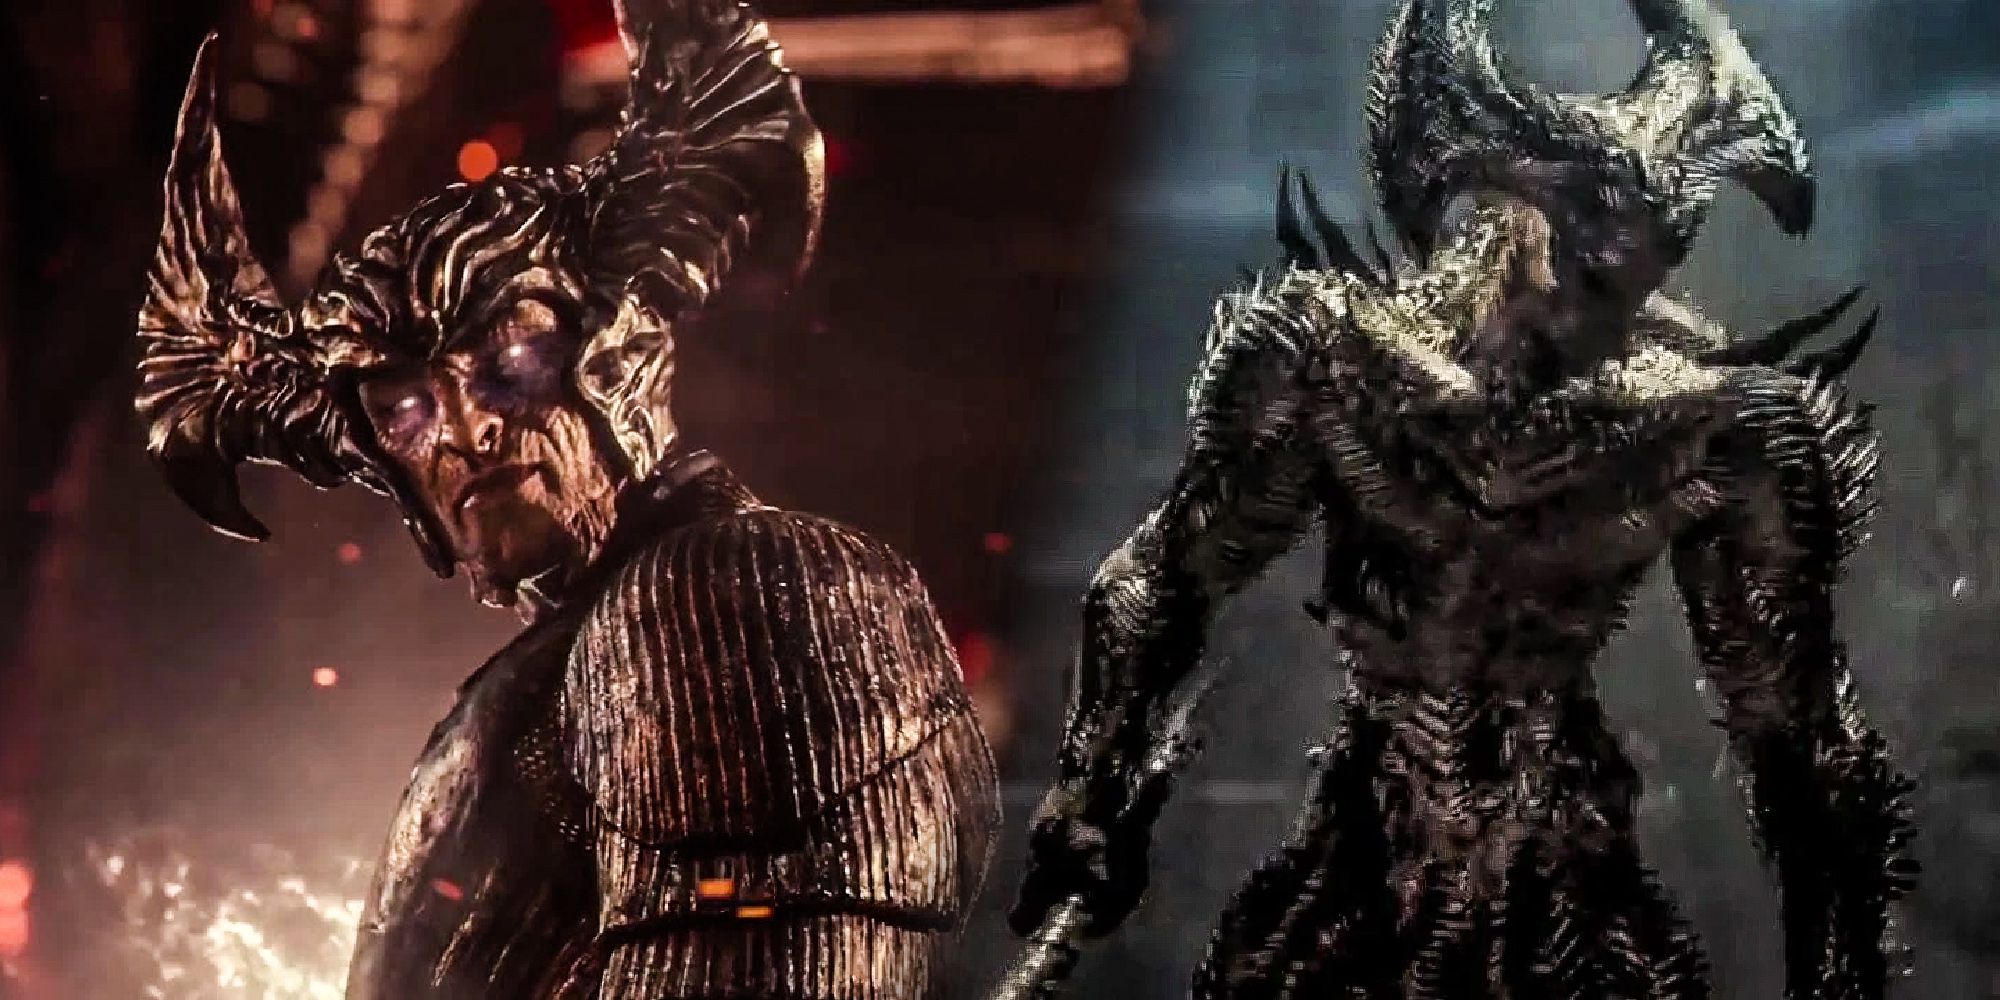 Justice League Zack Snyders New Steppenwolf Design Is Way Better